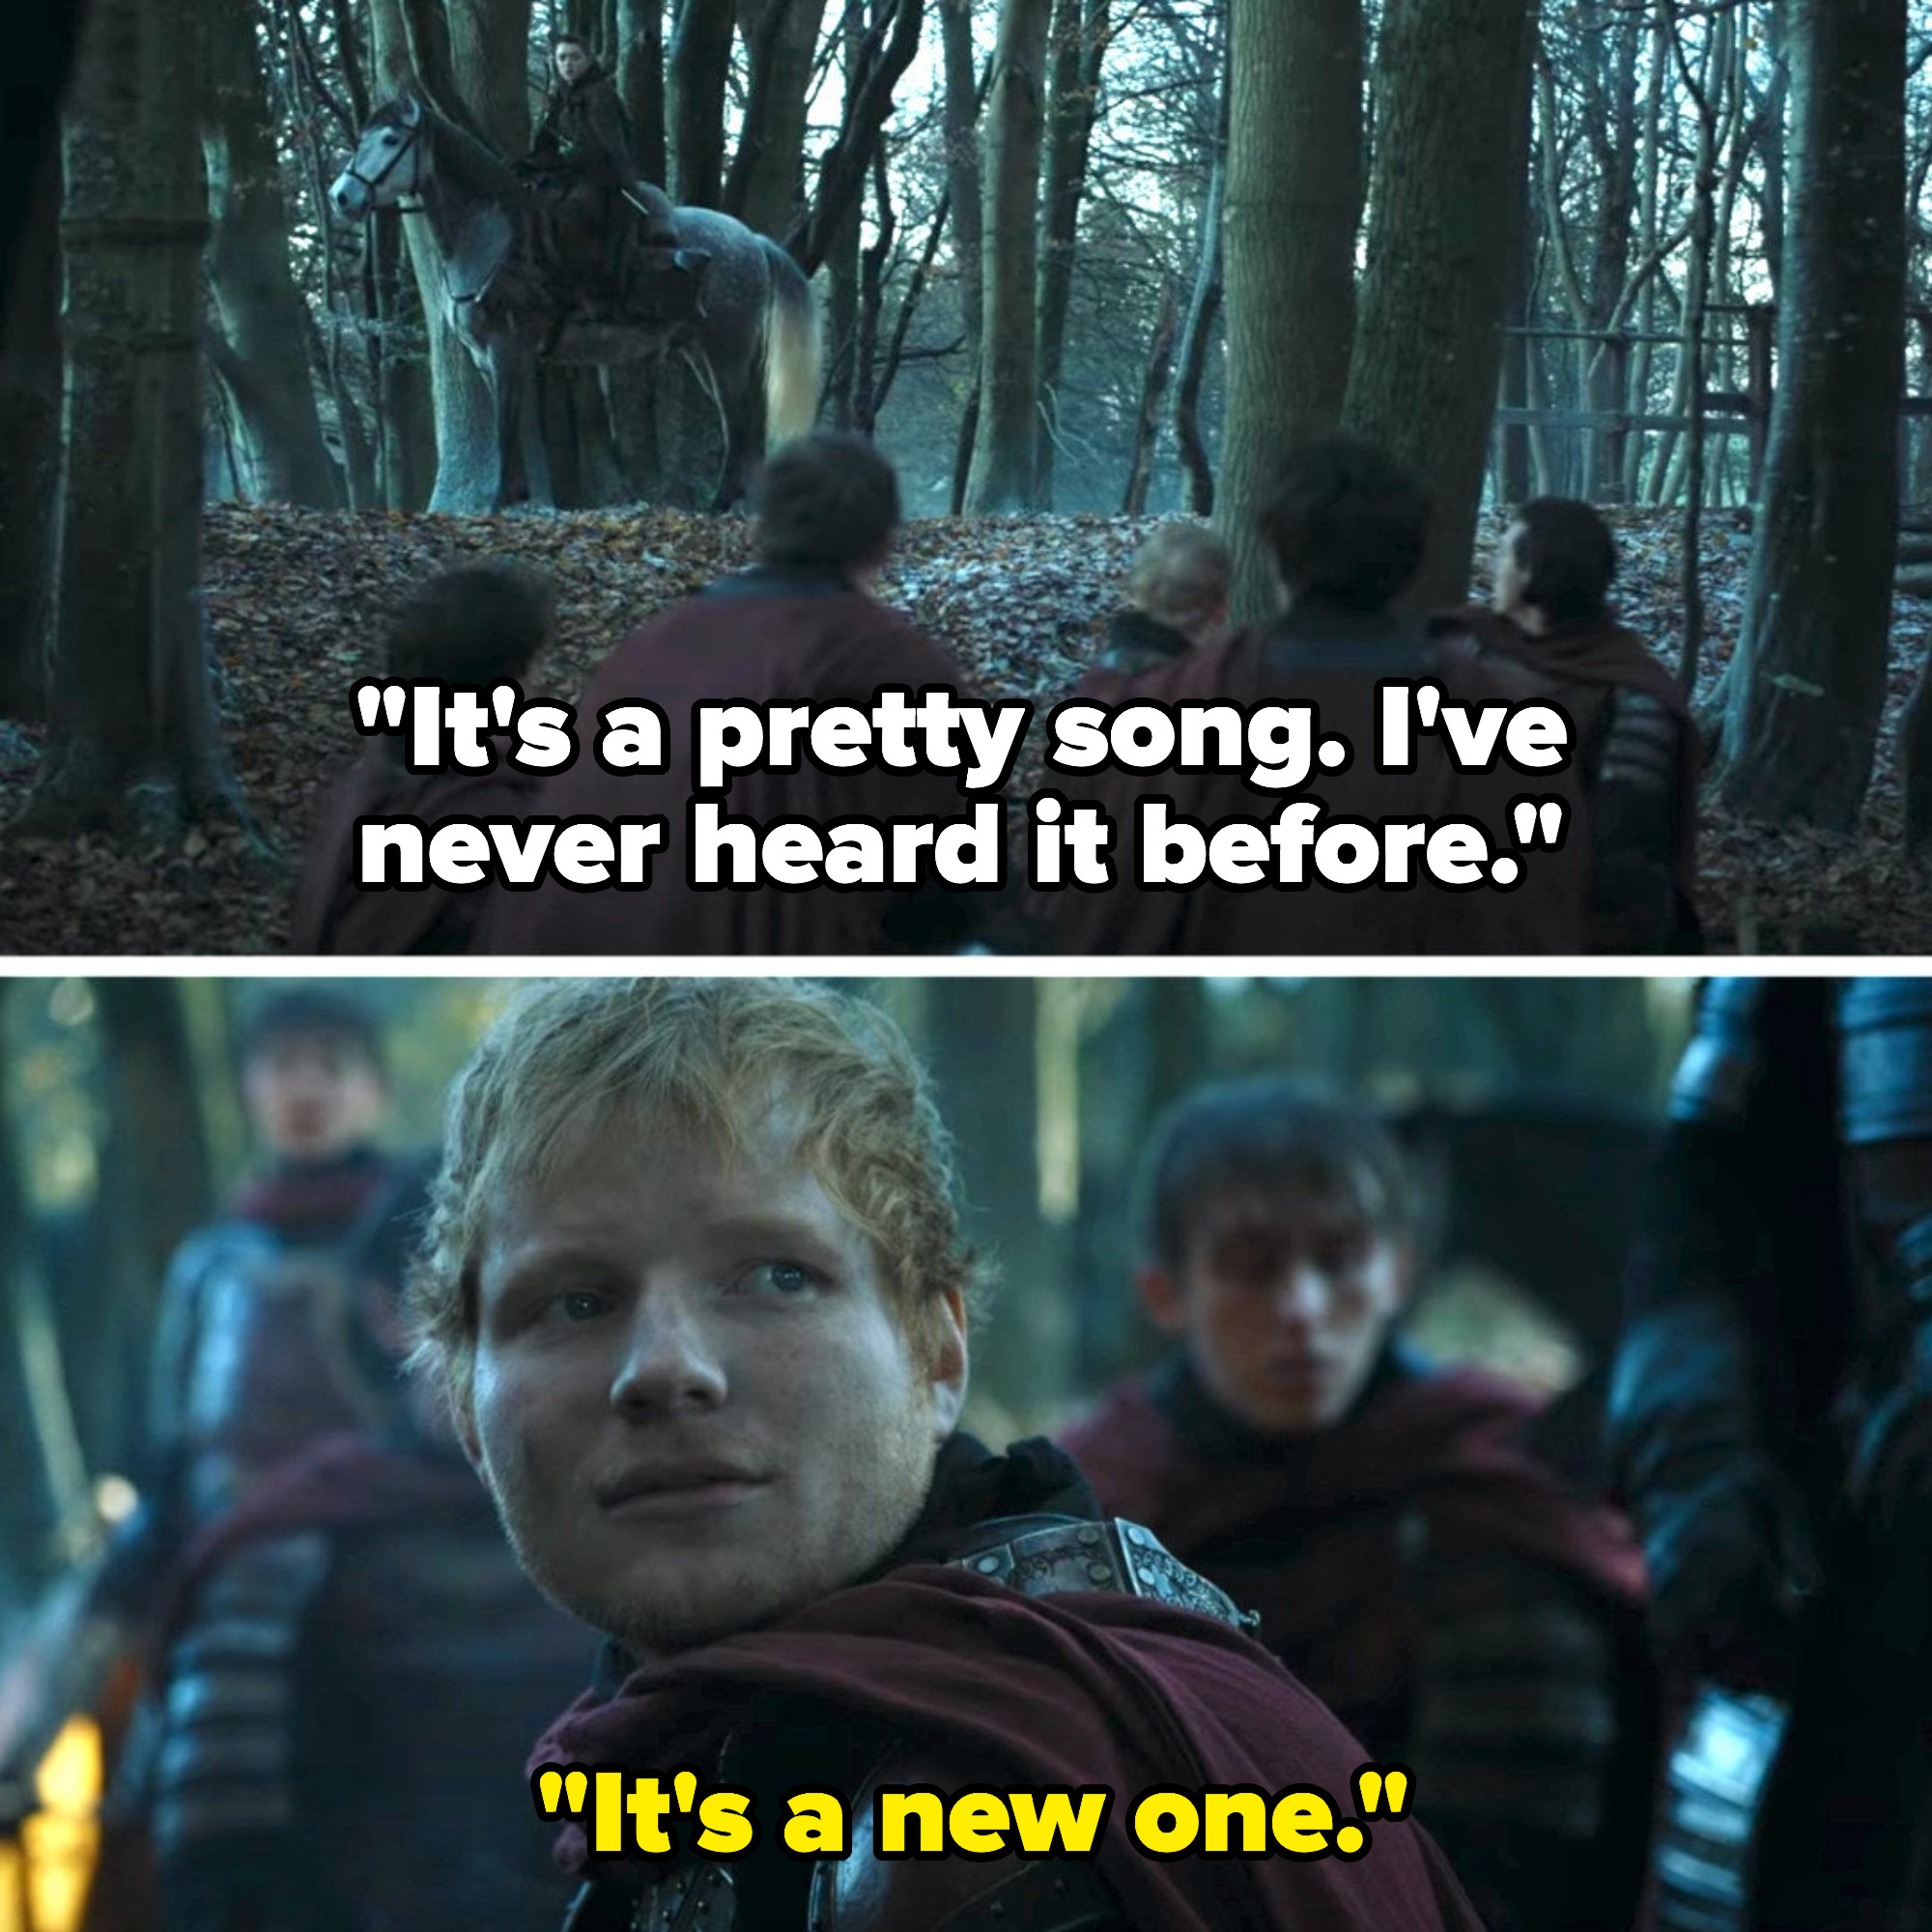 Arya: &quot;It&#x27;s a pretty song. I&#x27;ve never heard it before&quot; Ed: &quot;It&#x27;s a new one&quot;